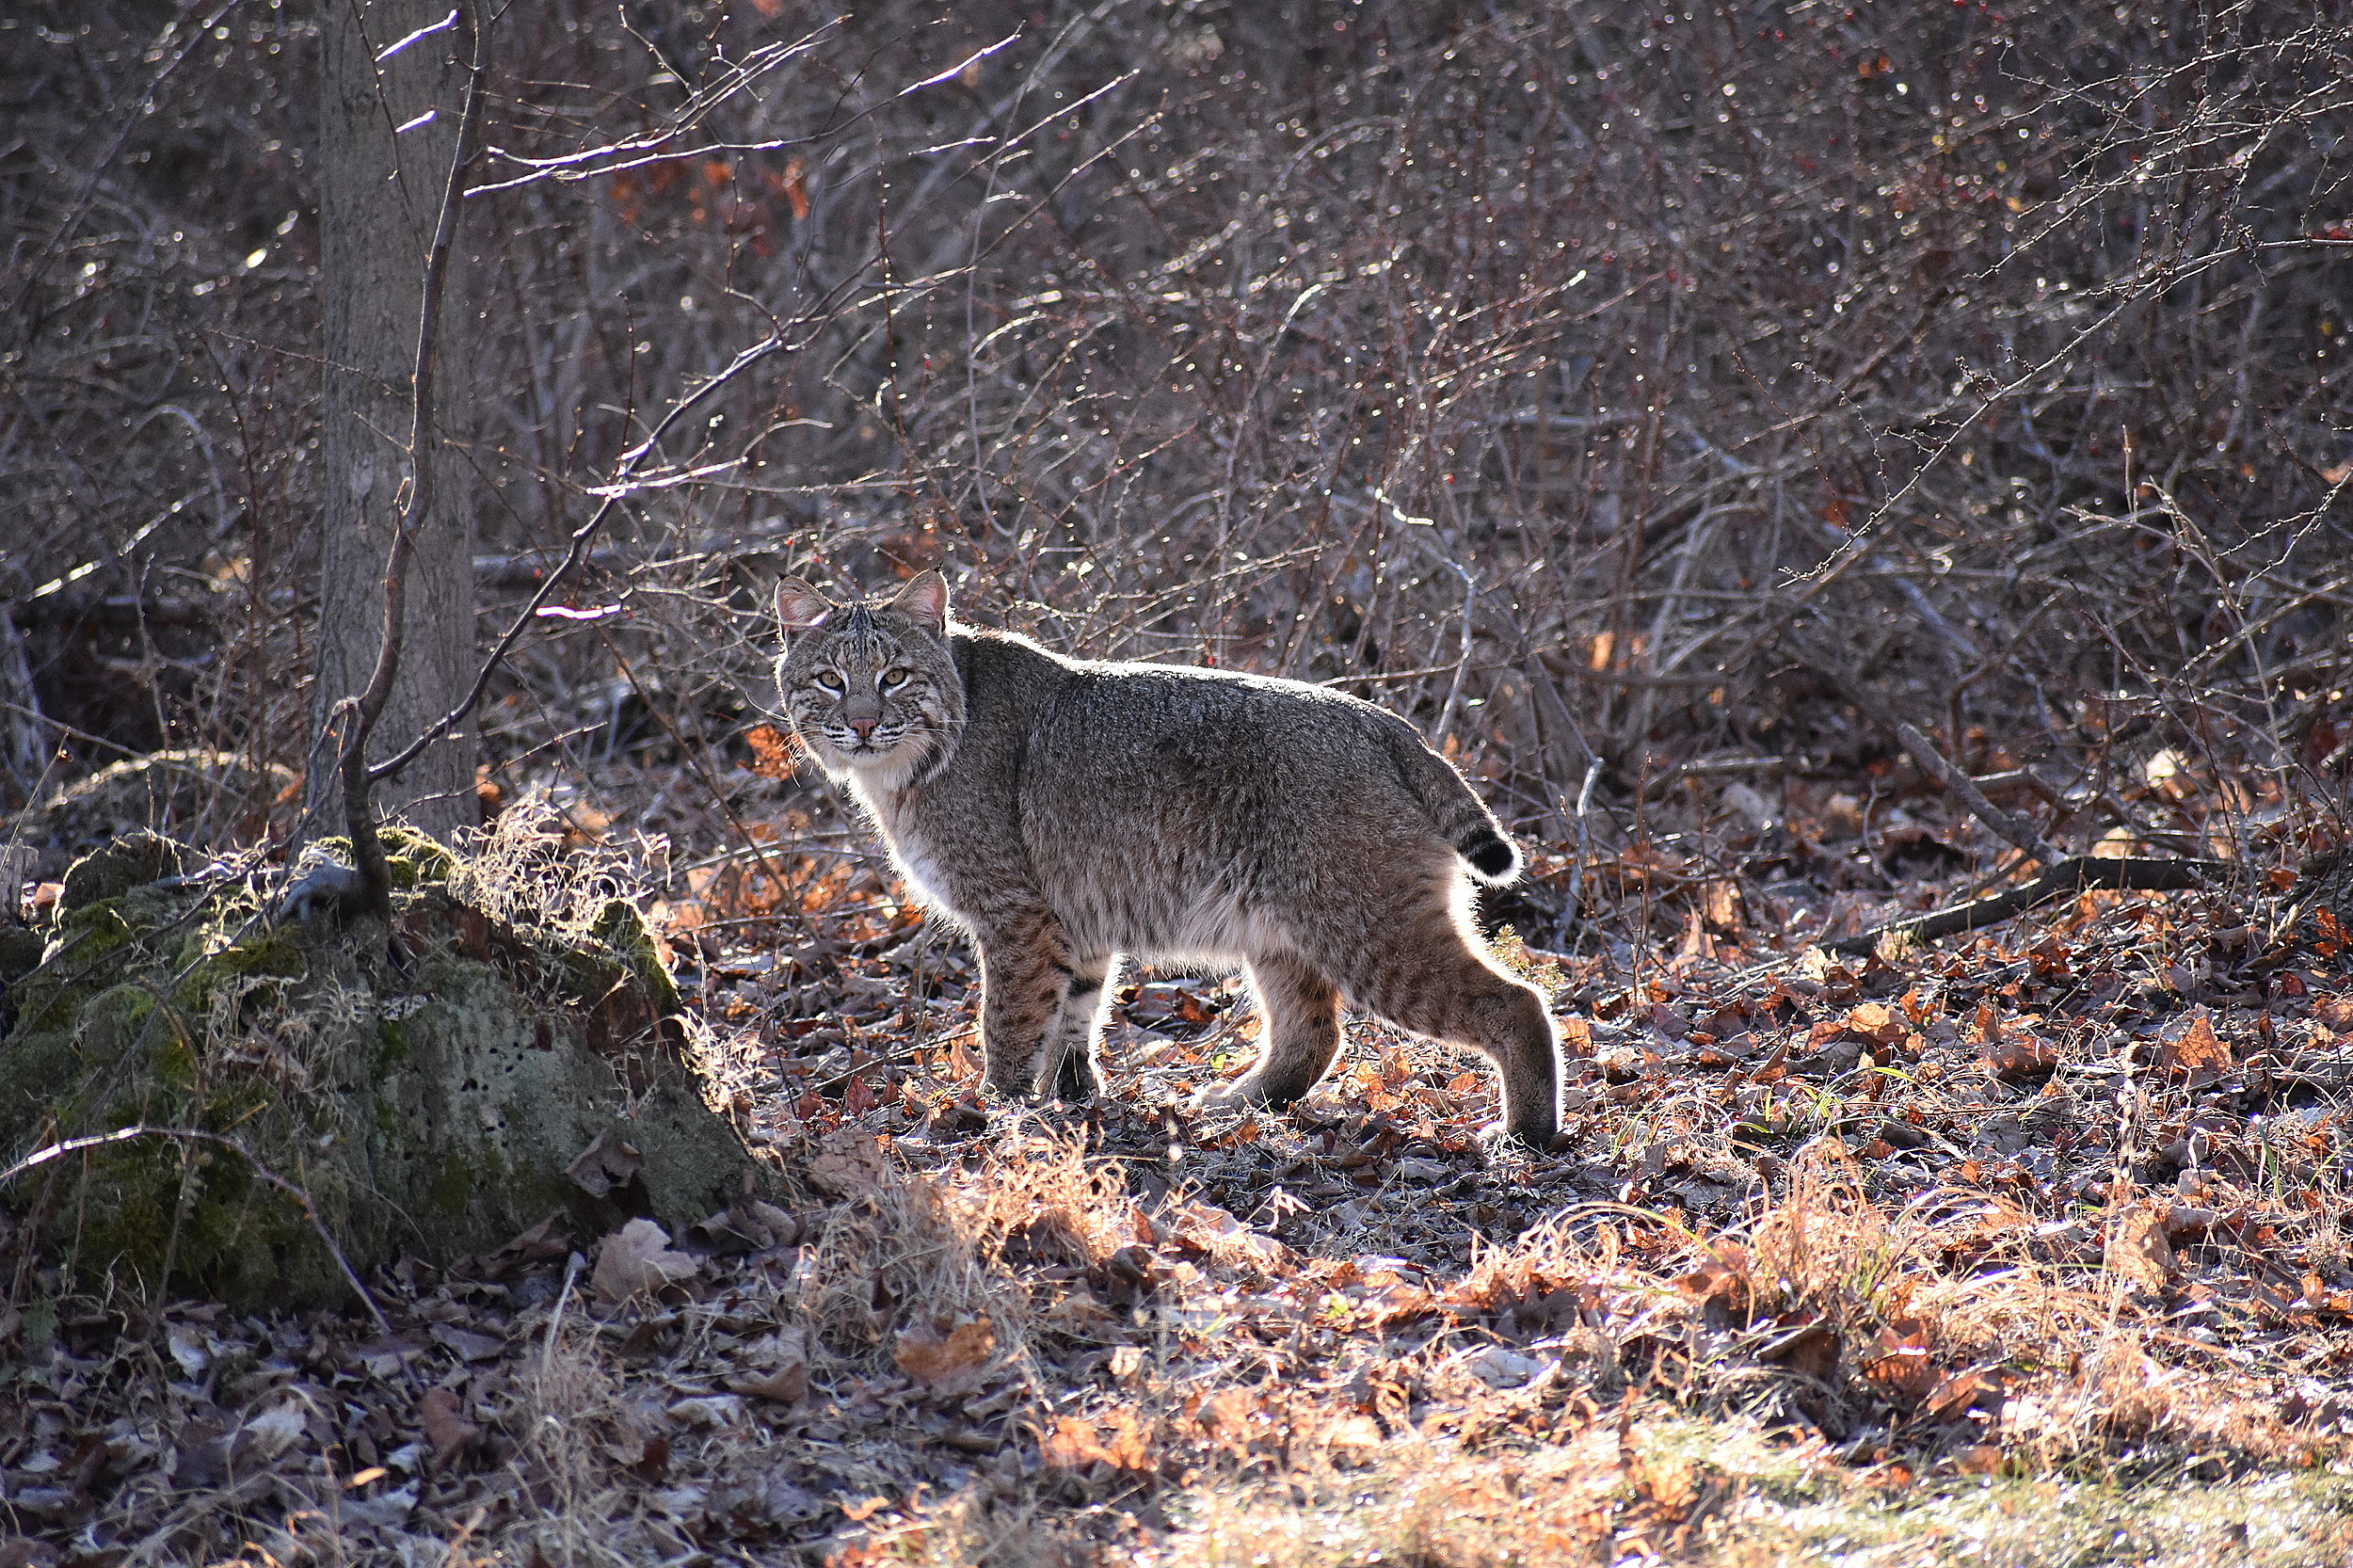 Bobcat Reportedly Spotted Near Hudson Valley Home in New York